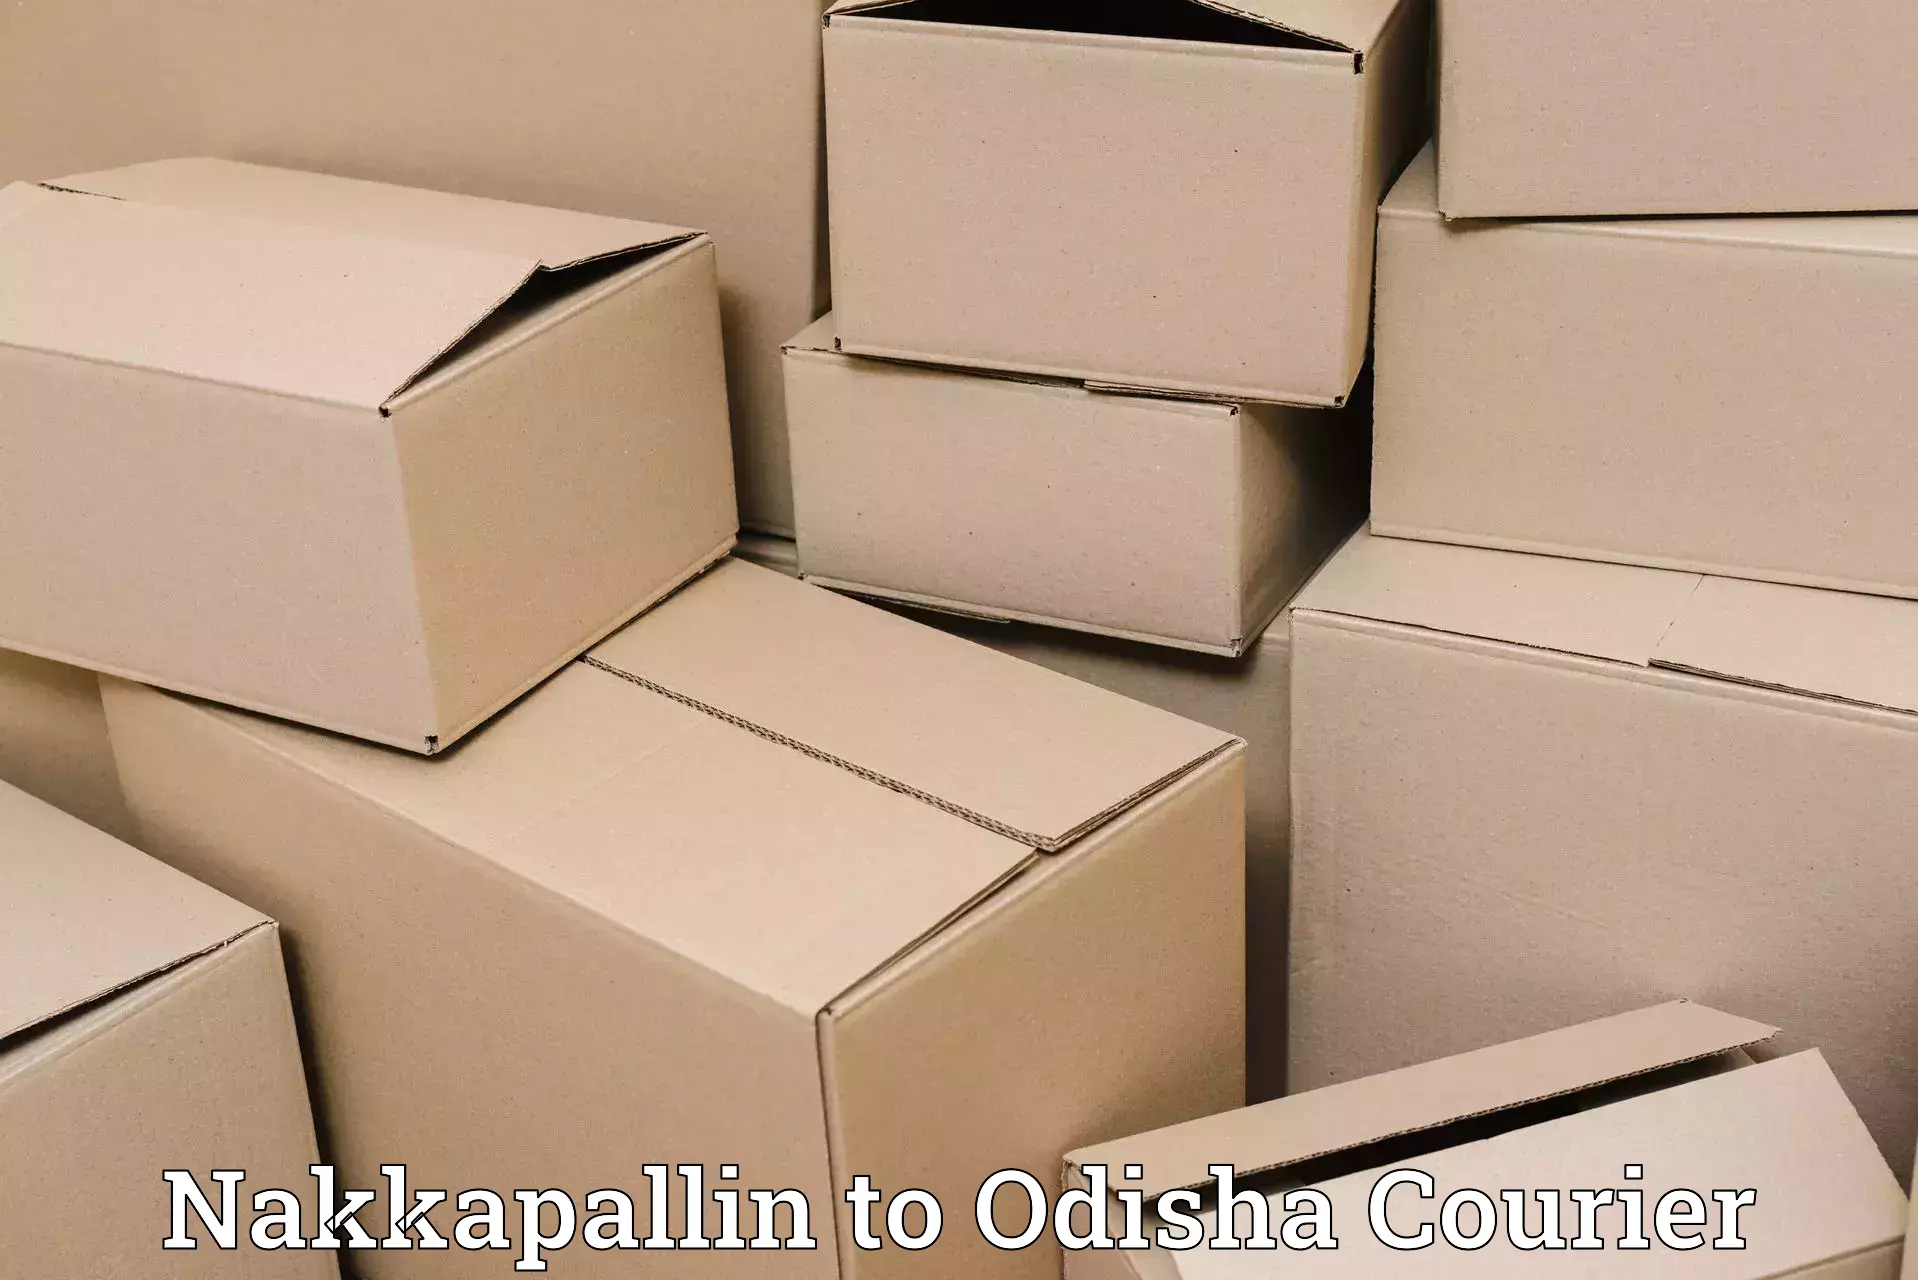 Corporate courier solutions in Nakkapallin to Sohela